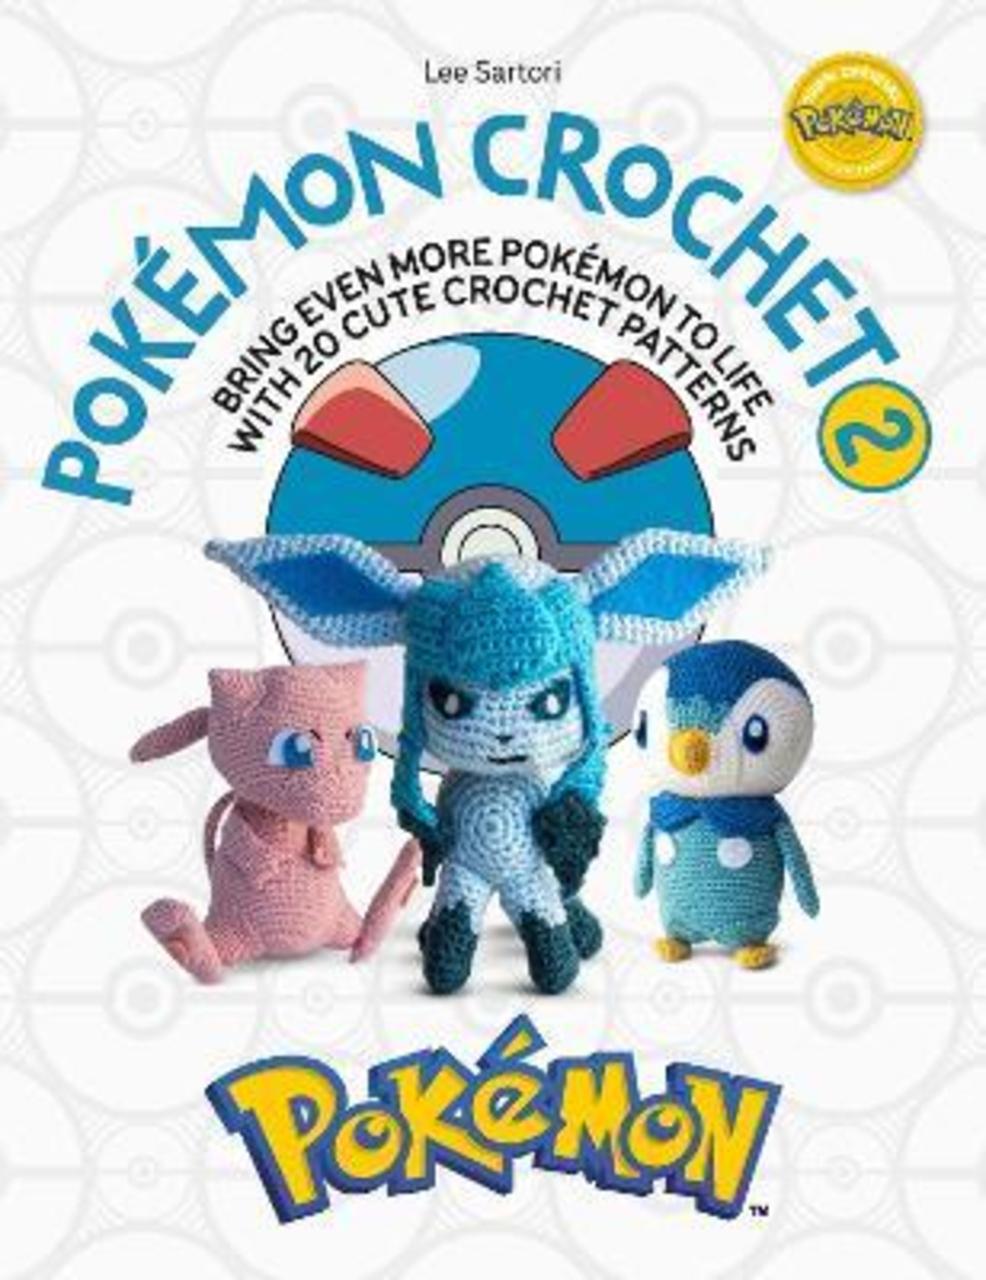 Sách - Pokemon Crochet Vol 2 : Bring even more Pokemon to life with 20 cute croch by Lee Sartori (UK edition, paperback)